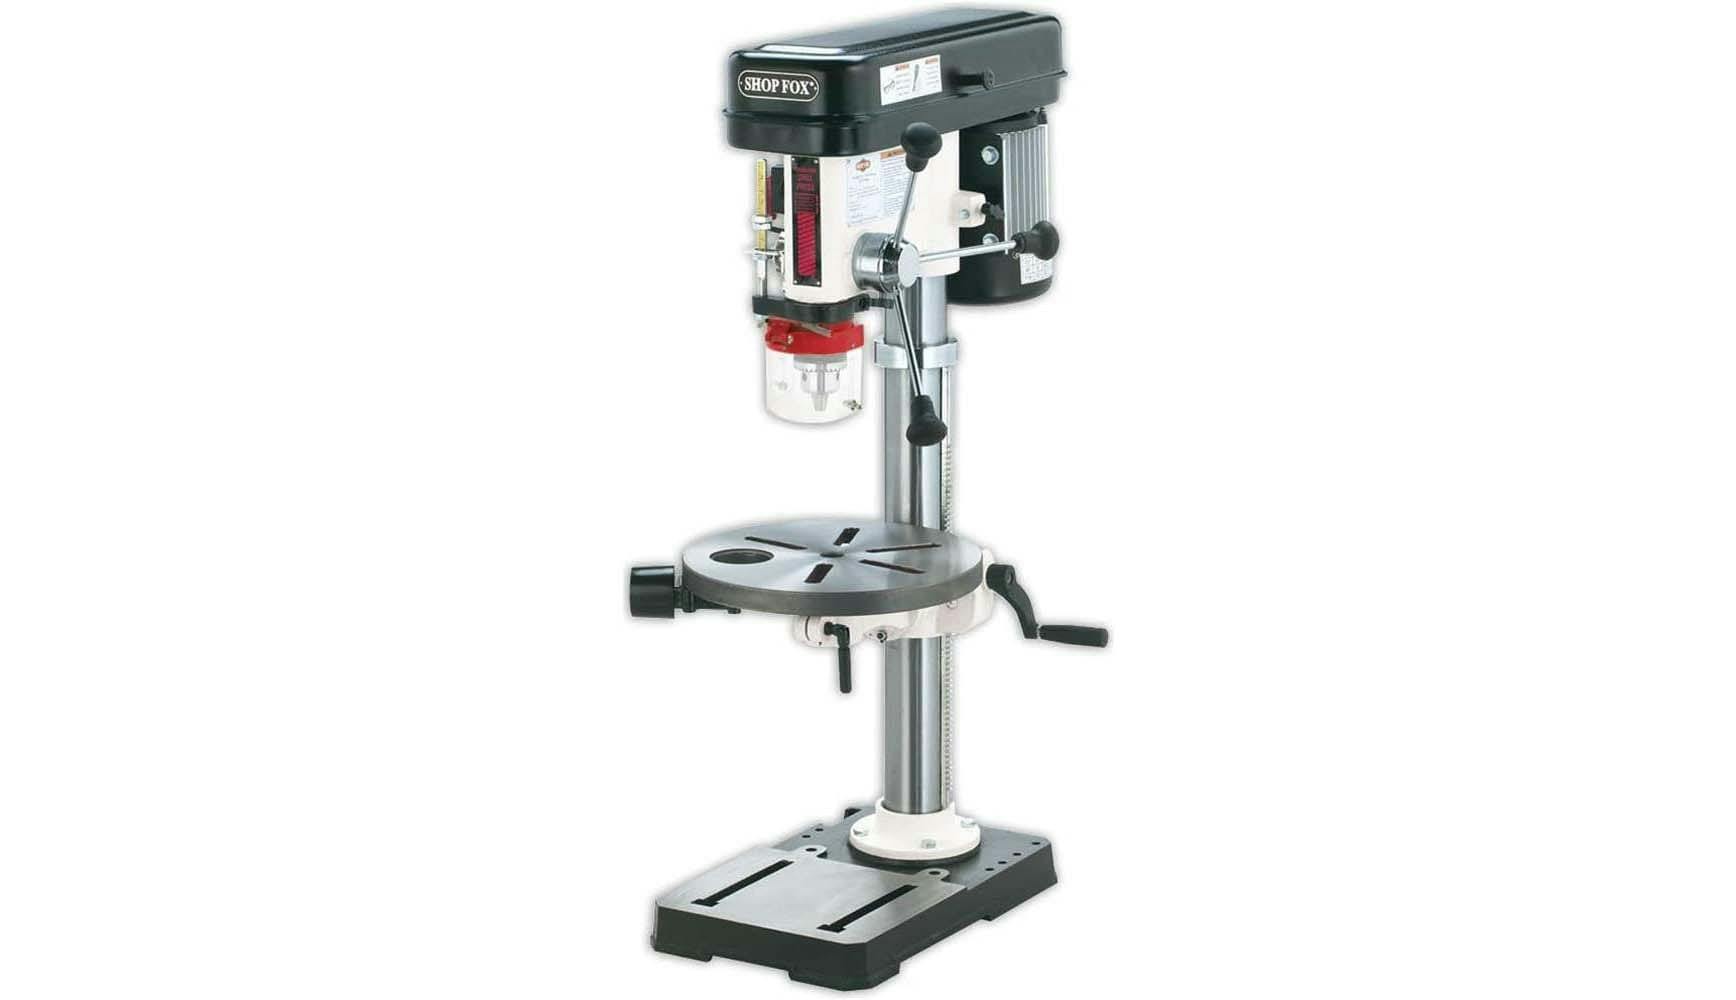 The Best Small Drill Press Of 2023: Our Reviews Of Mini Masters For Jewelry-Making